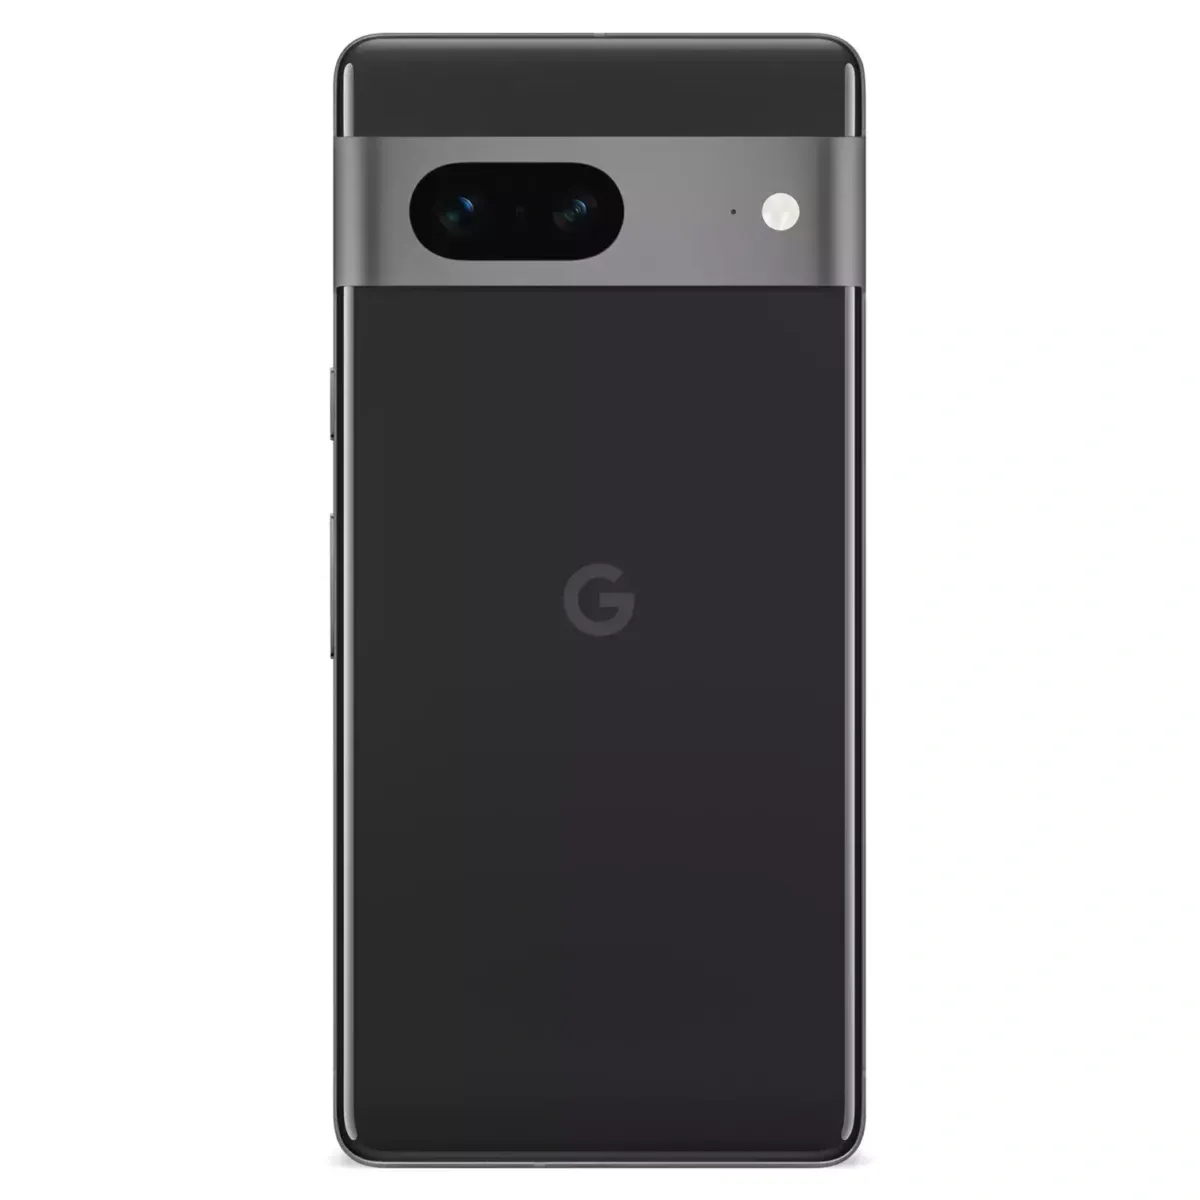 Google's online store is offering some good trade-in deals for the Pixel 7 Pro.